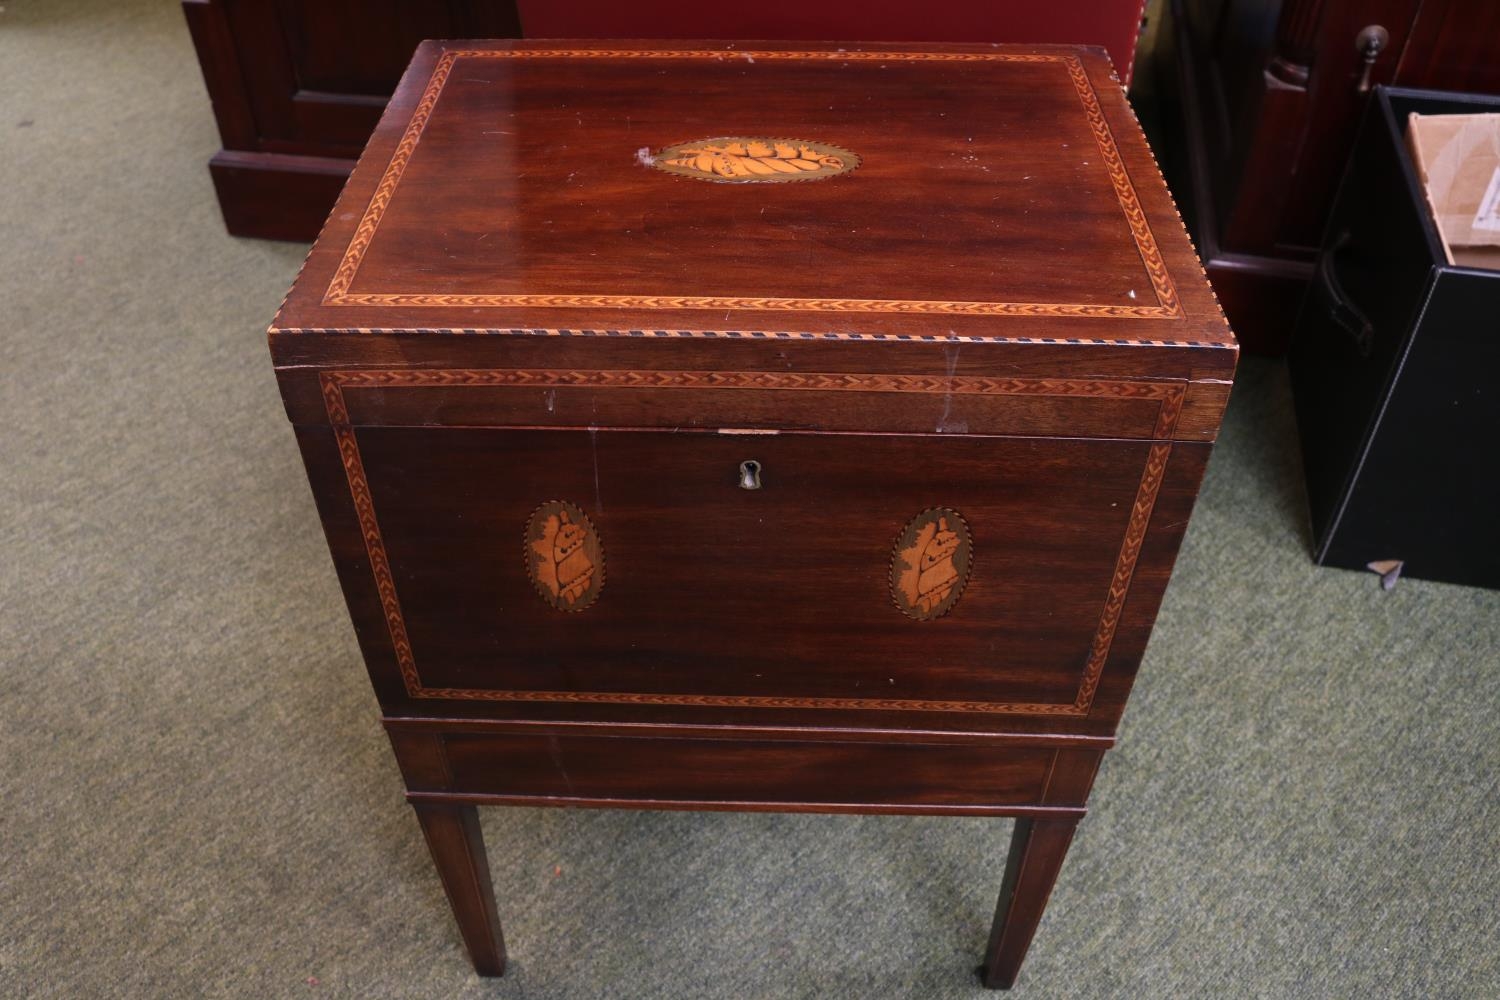 Georgian Inlaid Mahogany Wine Cooler on stand with integral drawer supported on tapering legs. - Image 3 of 6